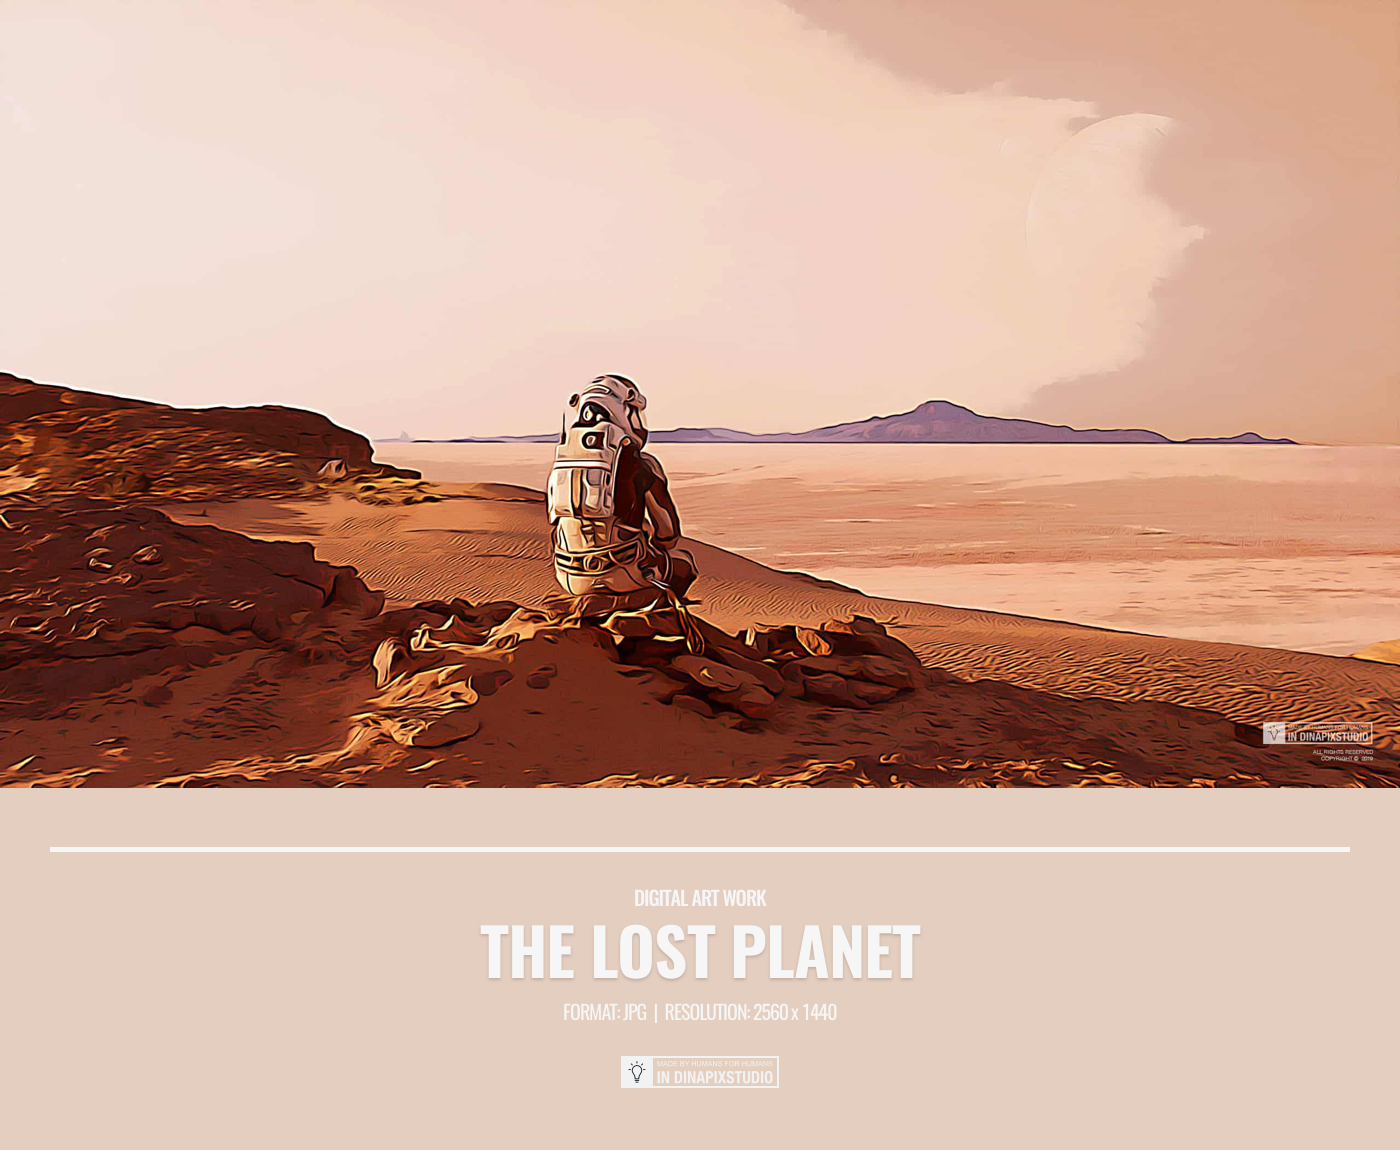 astronaut Digital Art  lost planet nasa outer space Planet Mars Space man Wallpaper design Wallpapers